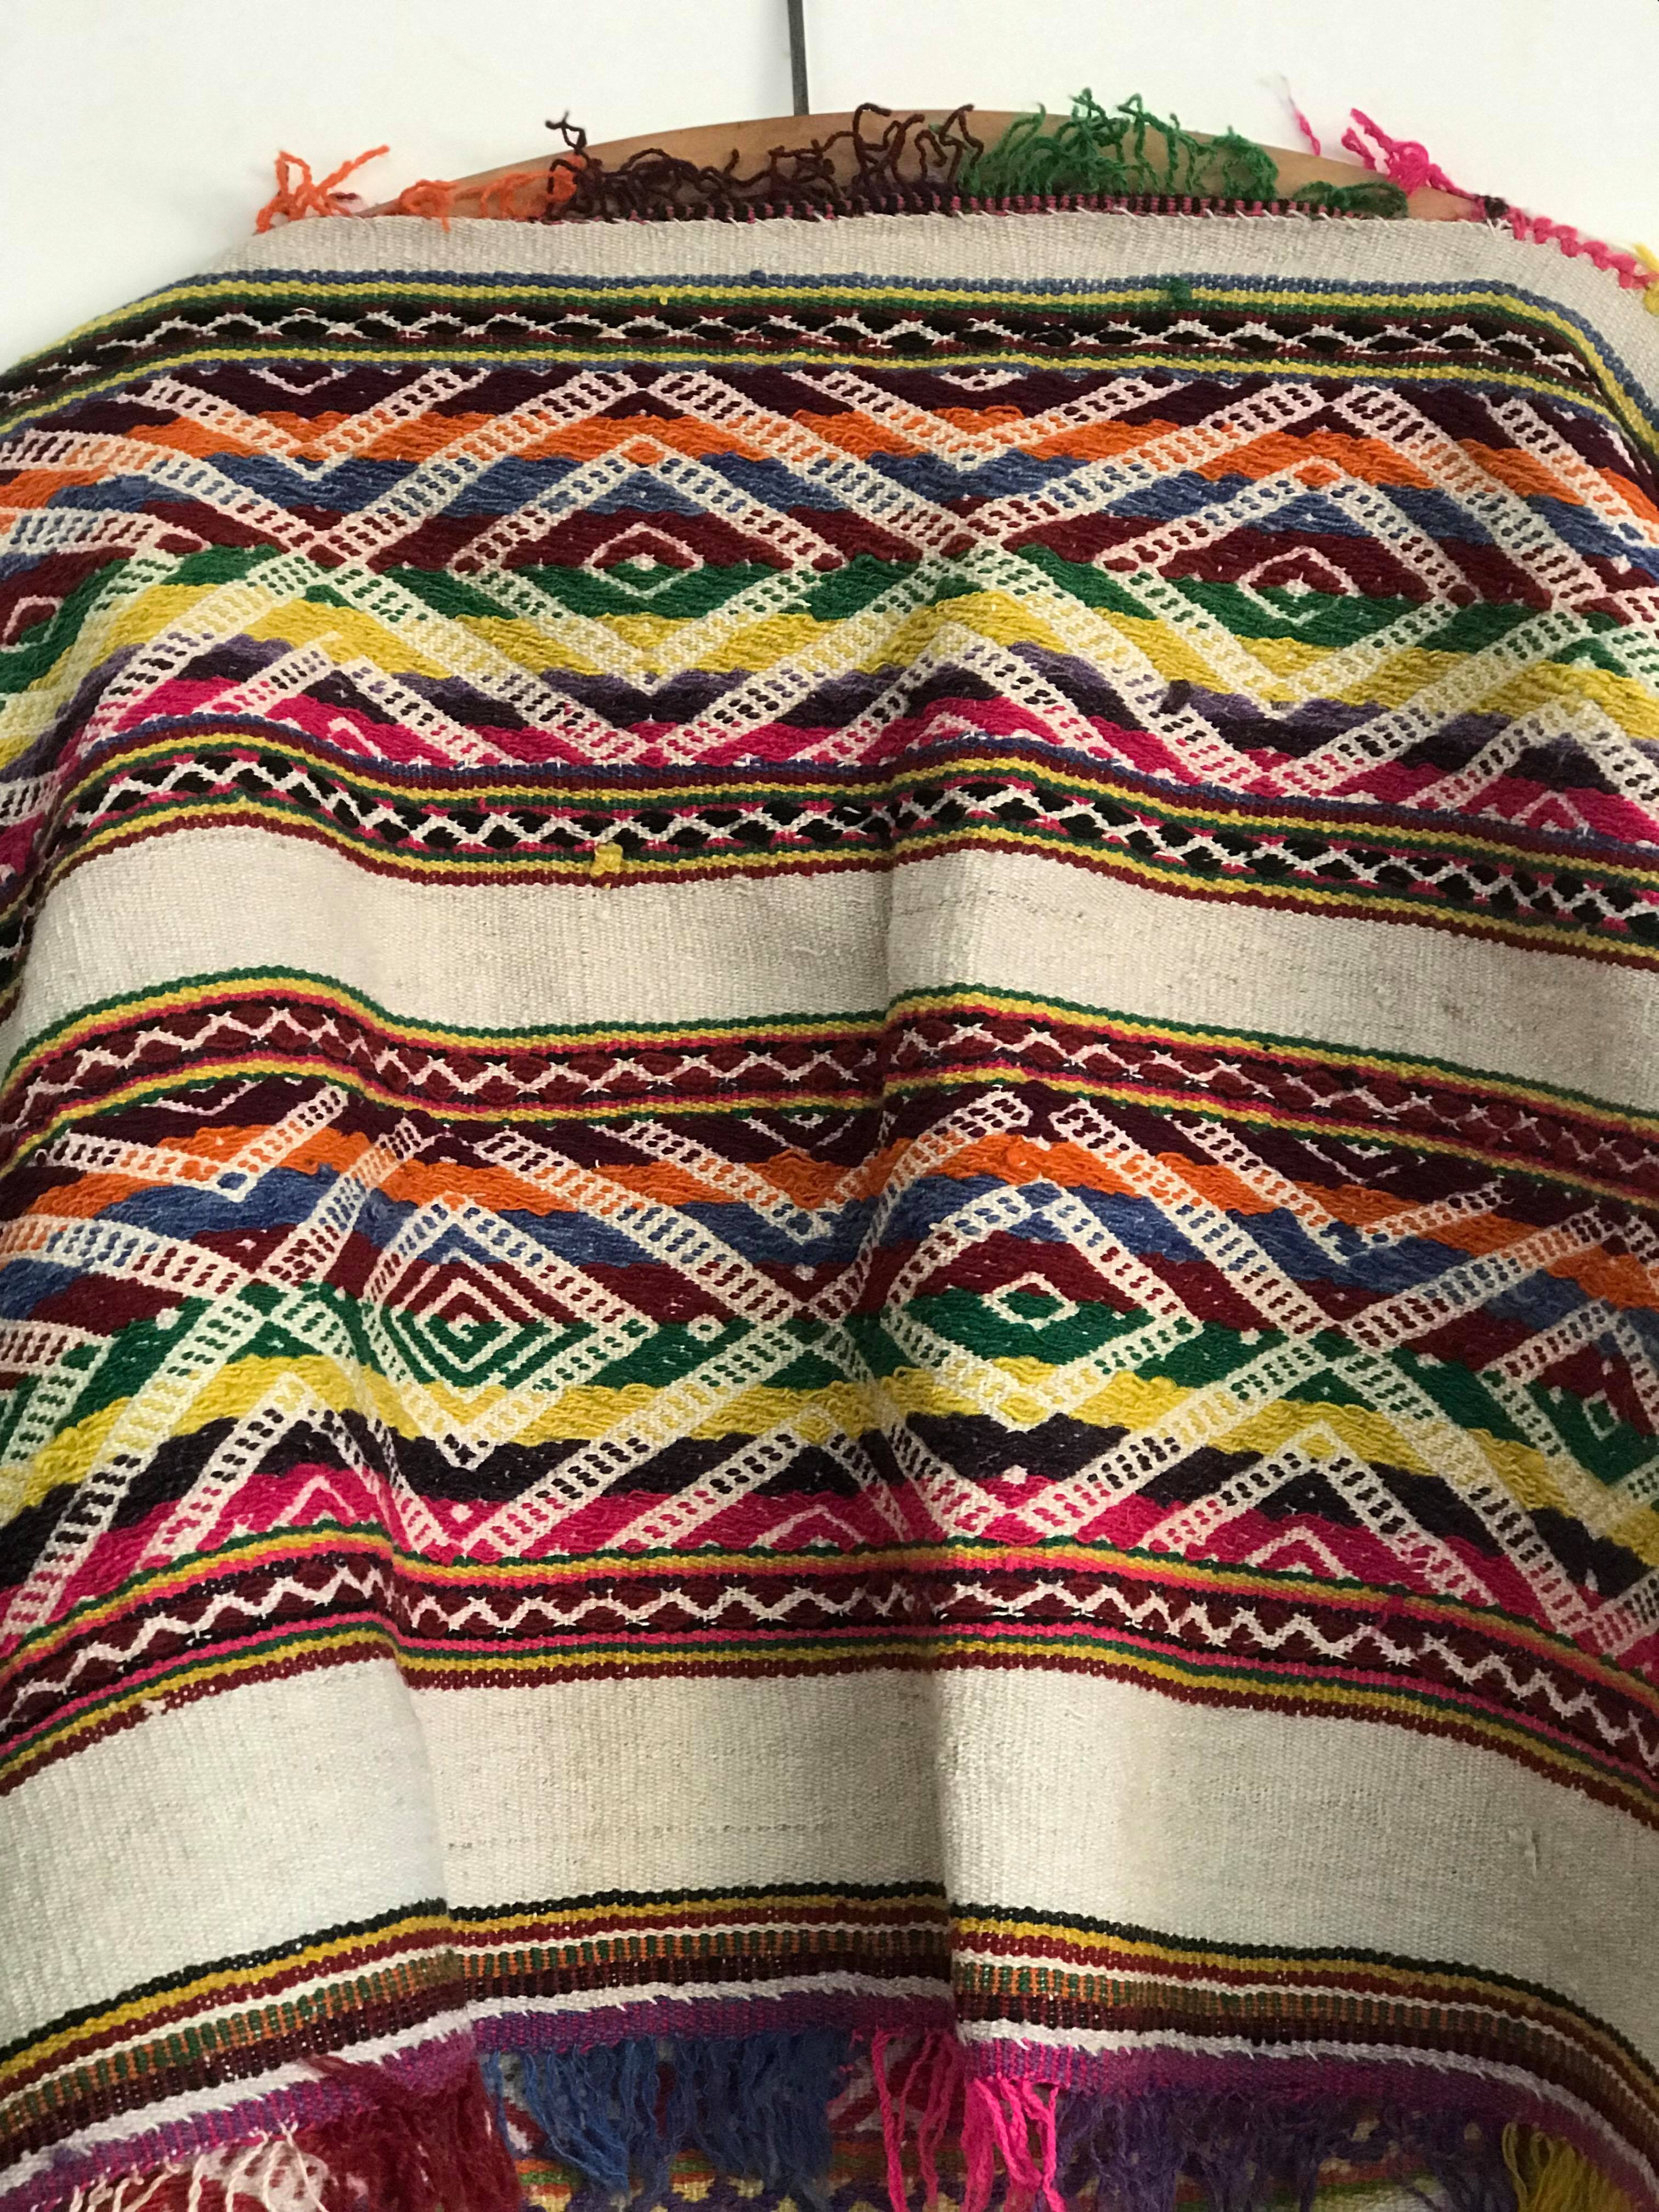 Antique Andean Poncho from Peru